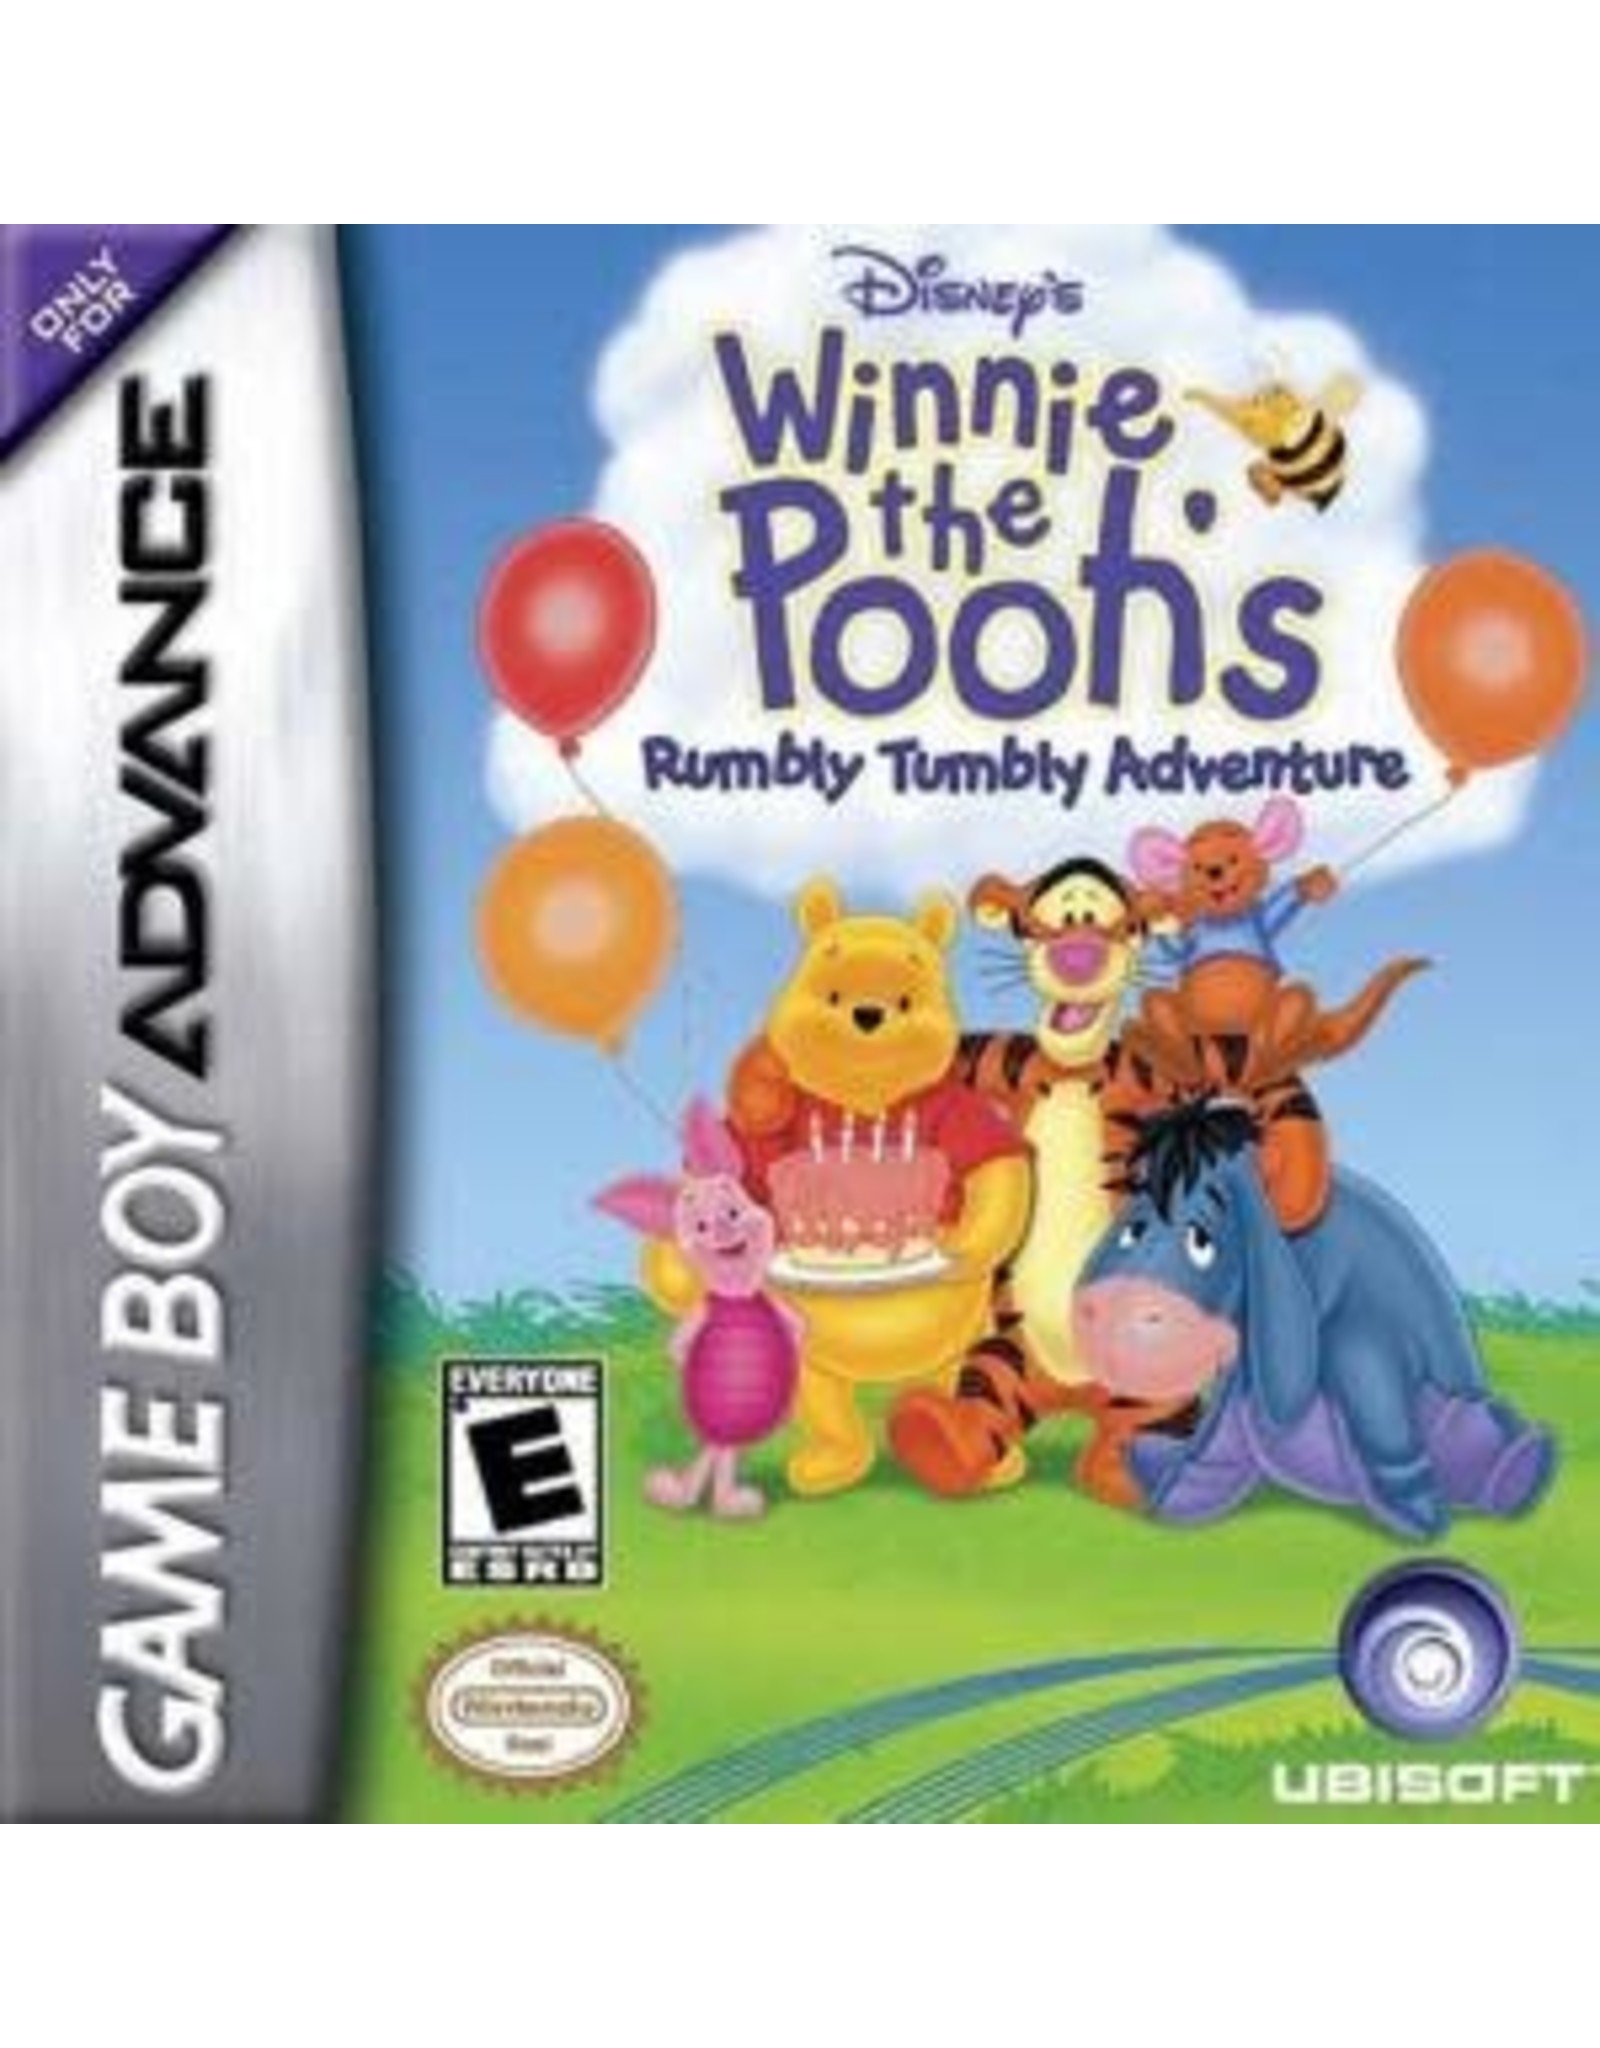 Game Boy Advance Winnie the Pooh Rumbly Tumbly Adventure (Cart Only)